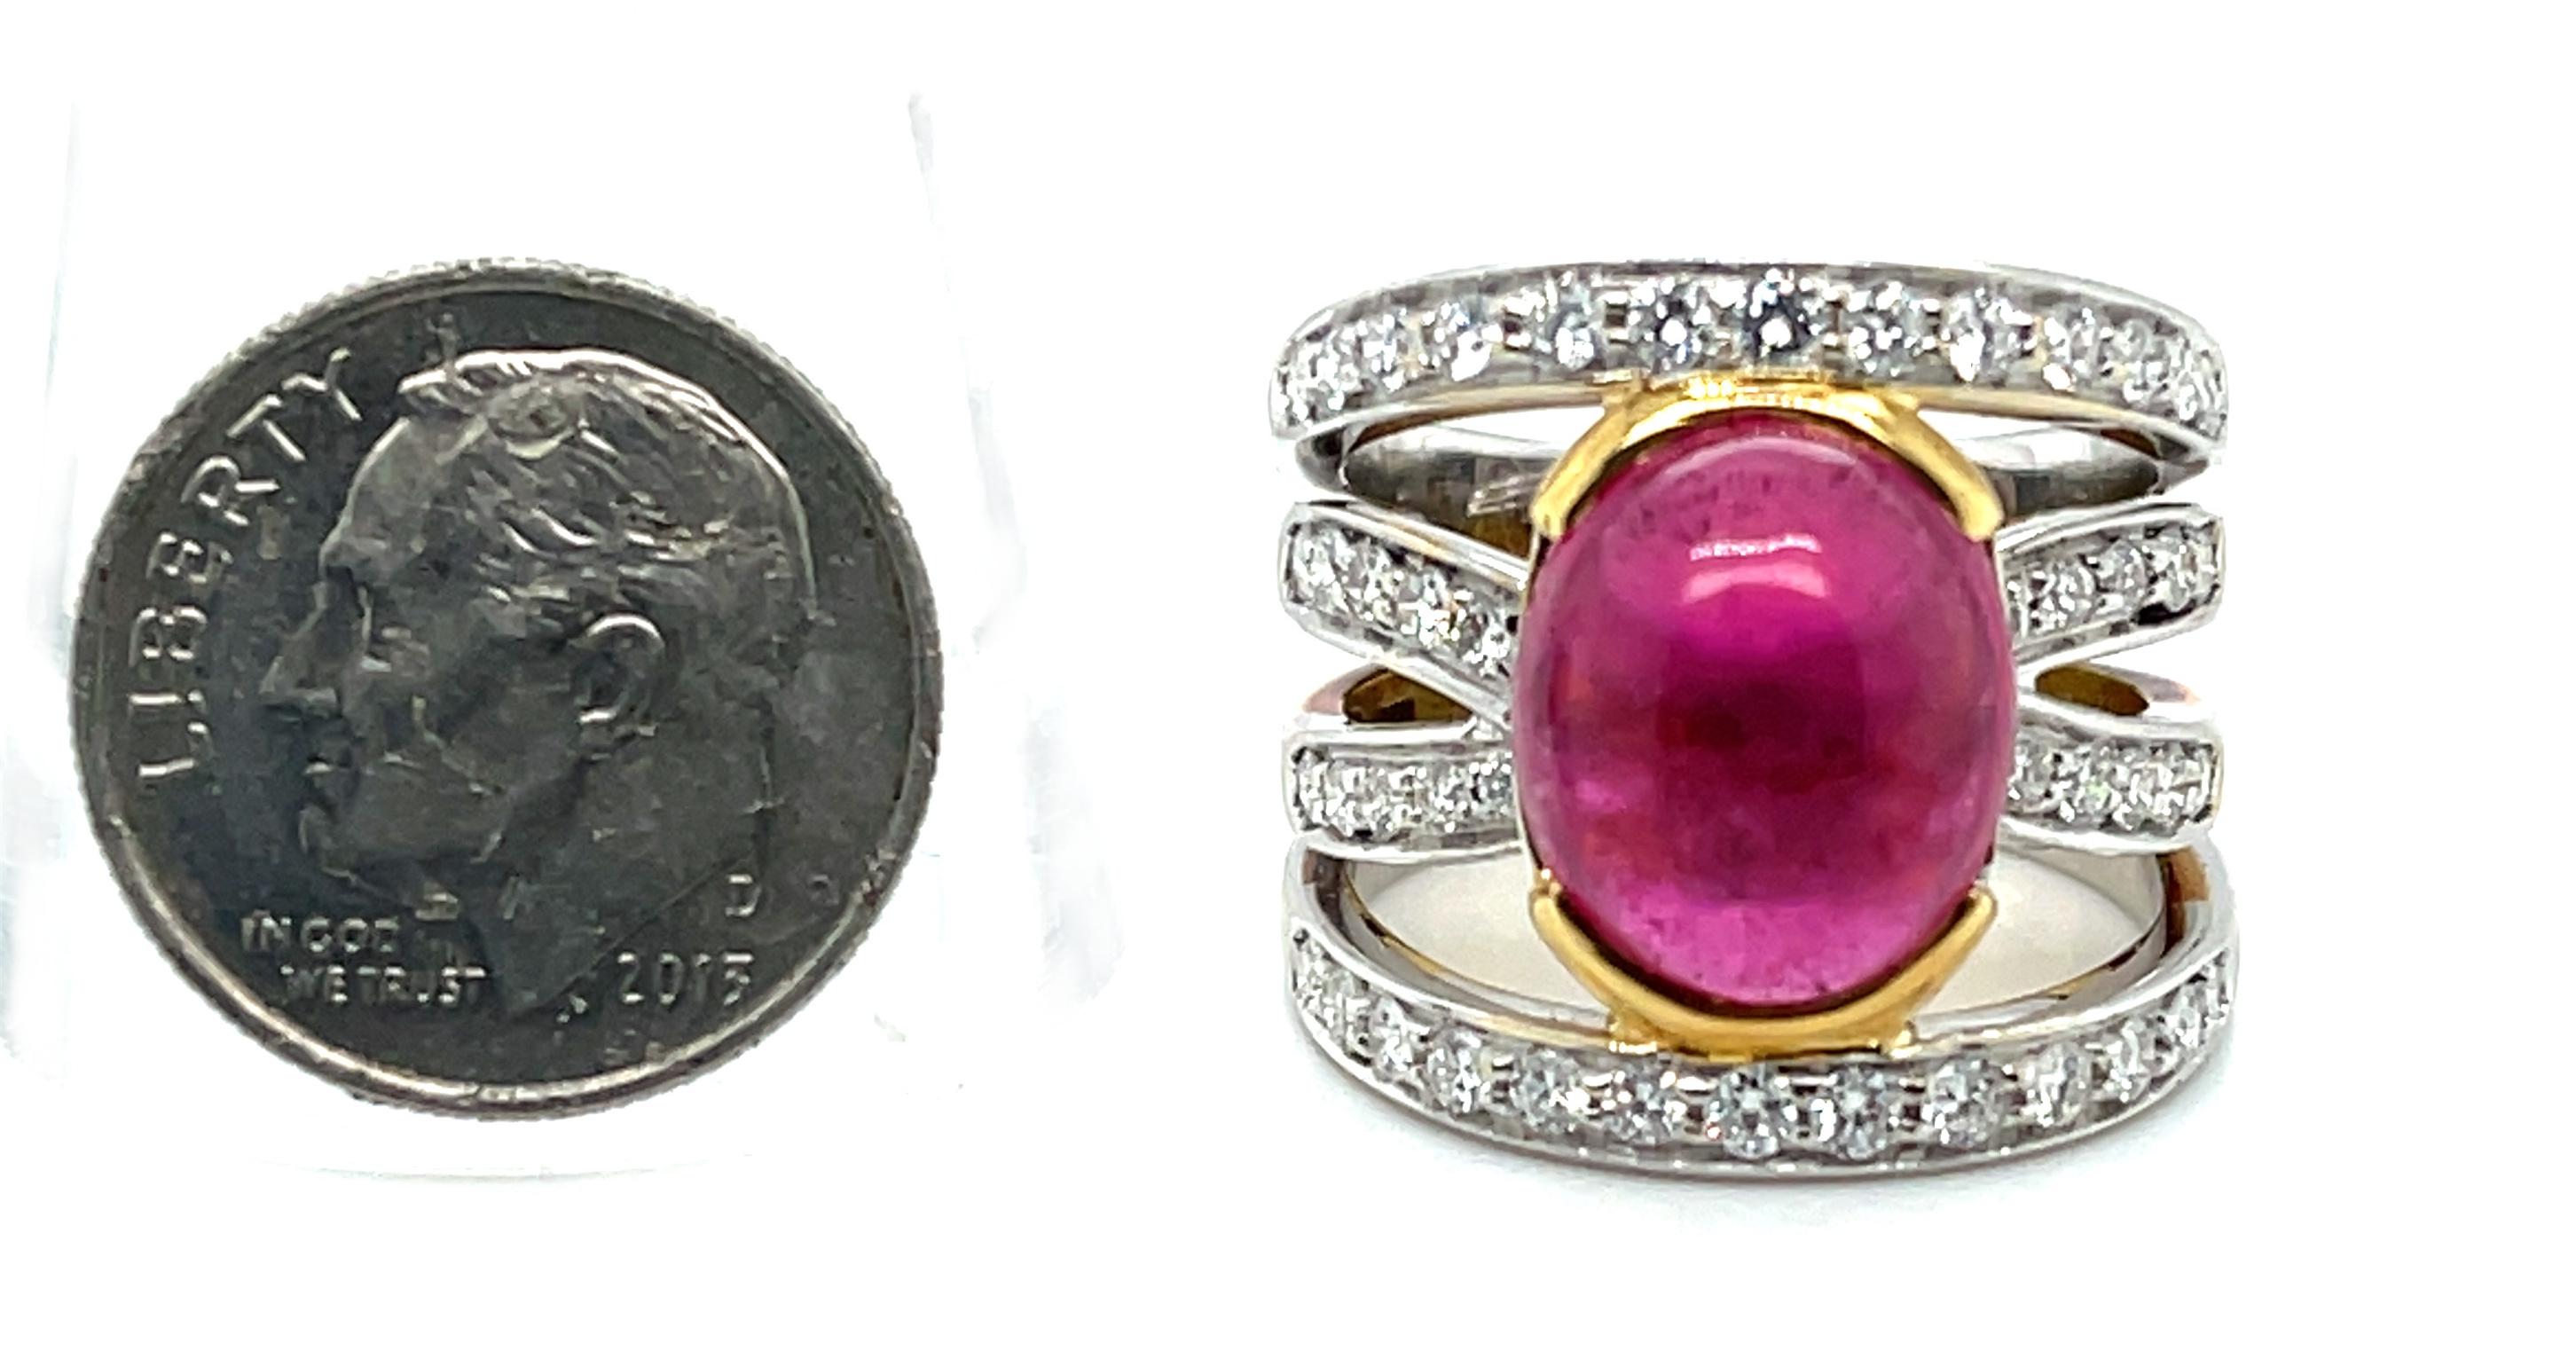 8.44 Carat Pink Tourmaline Cabochon and Diamond Band Ring in 18k Gold In New Condition For Sale In Los Angeles, CA